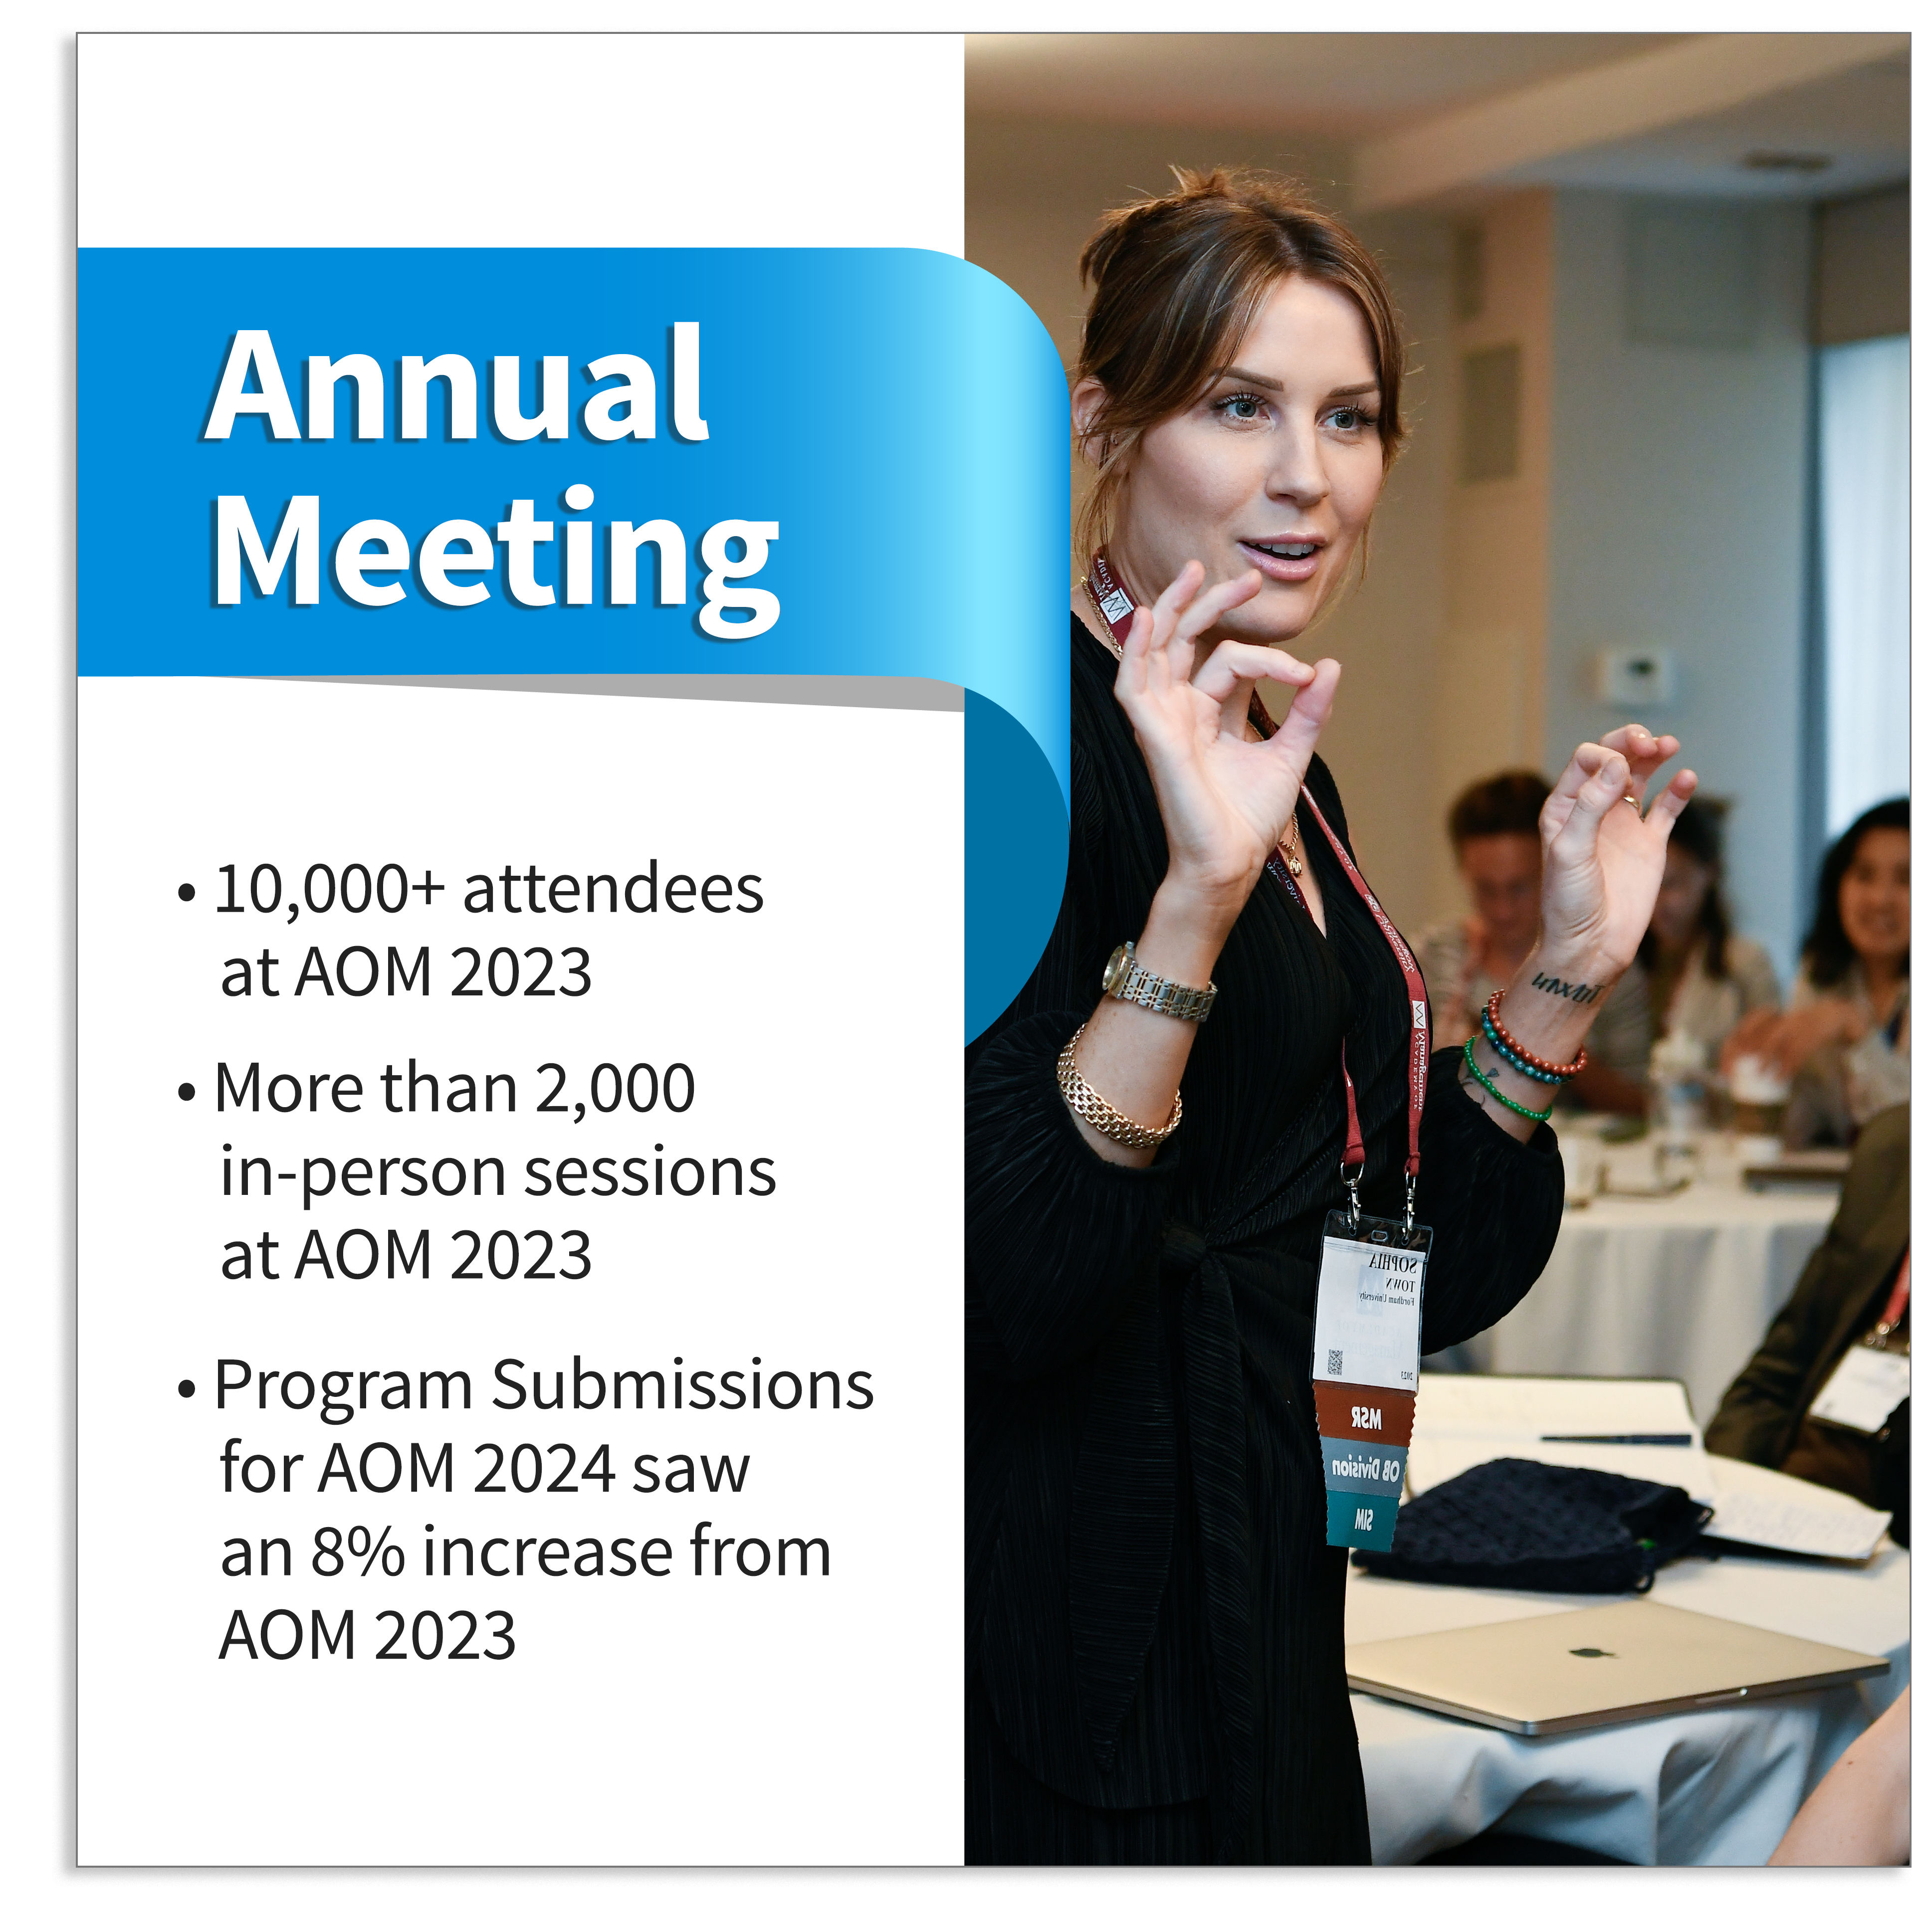 Annual Meeting attendance details